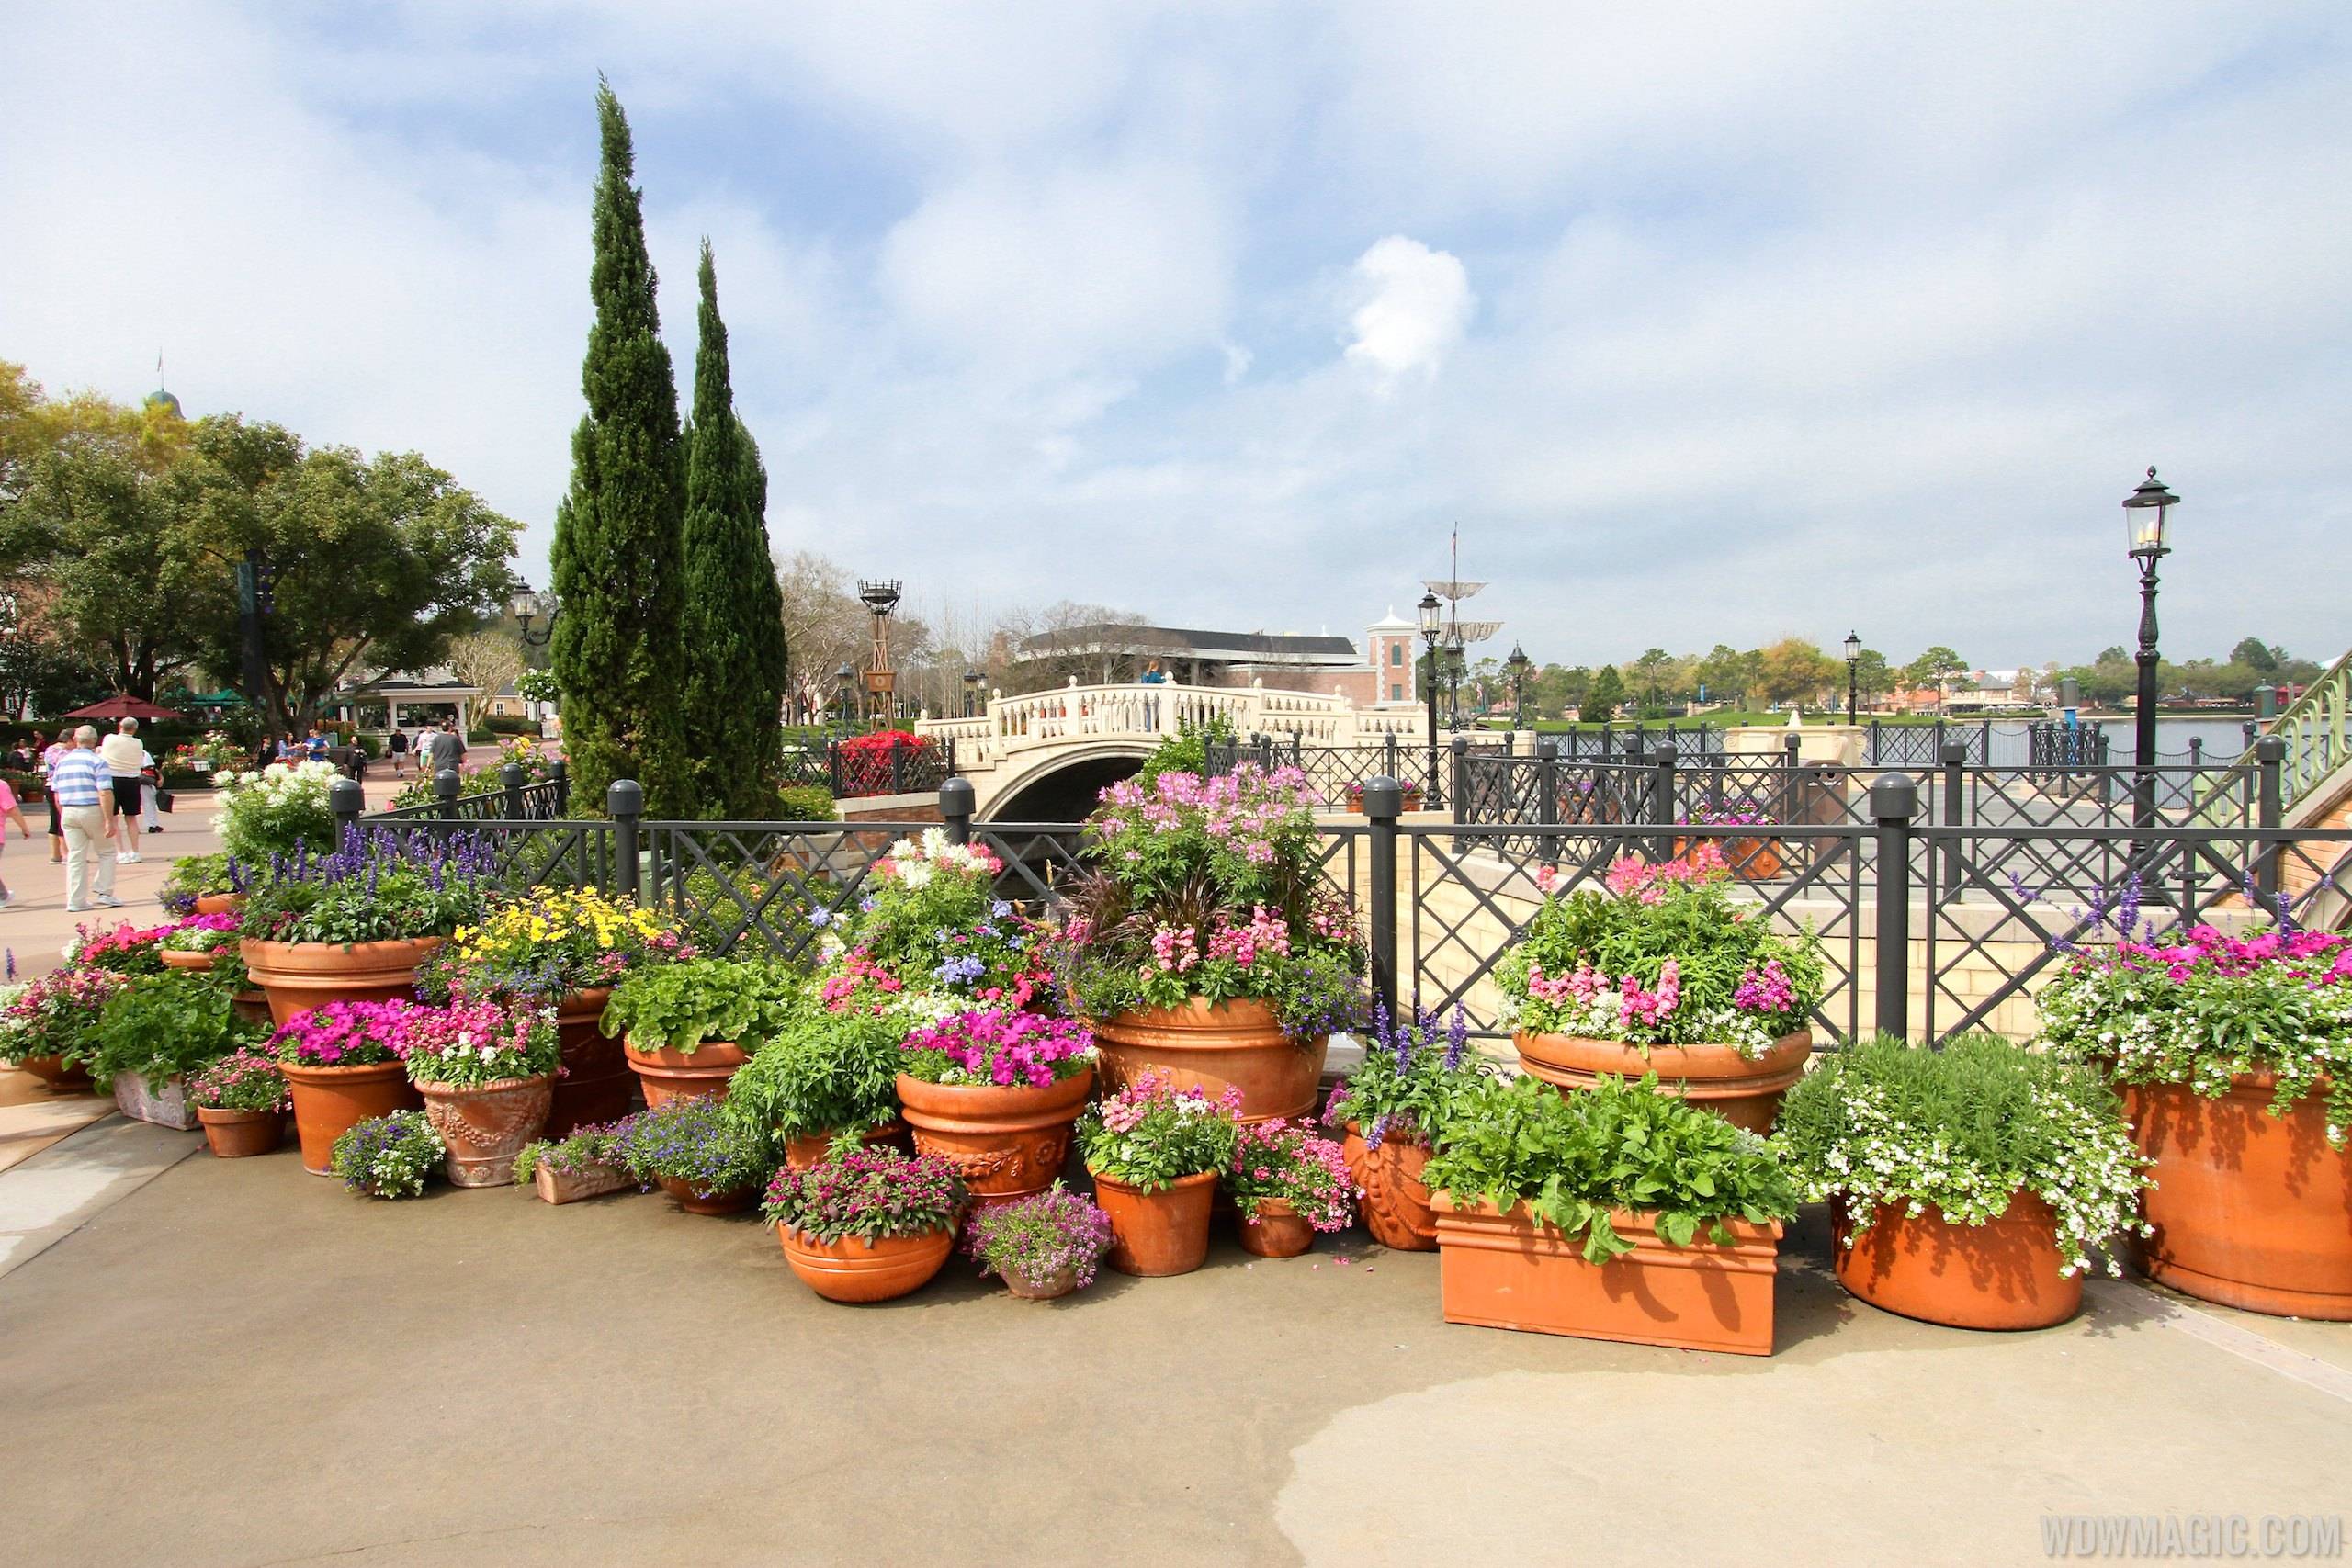 2014 Epcot Flower and Garden Festival - Italy Pavilion floral planters